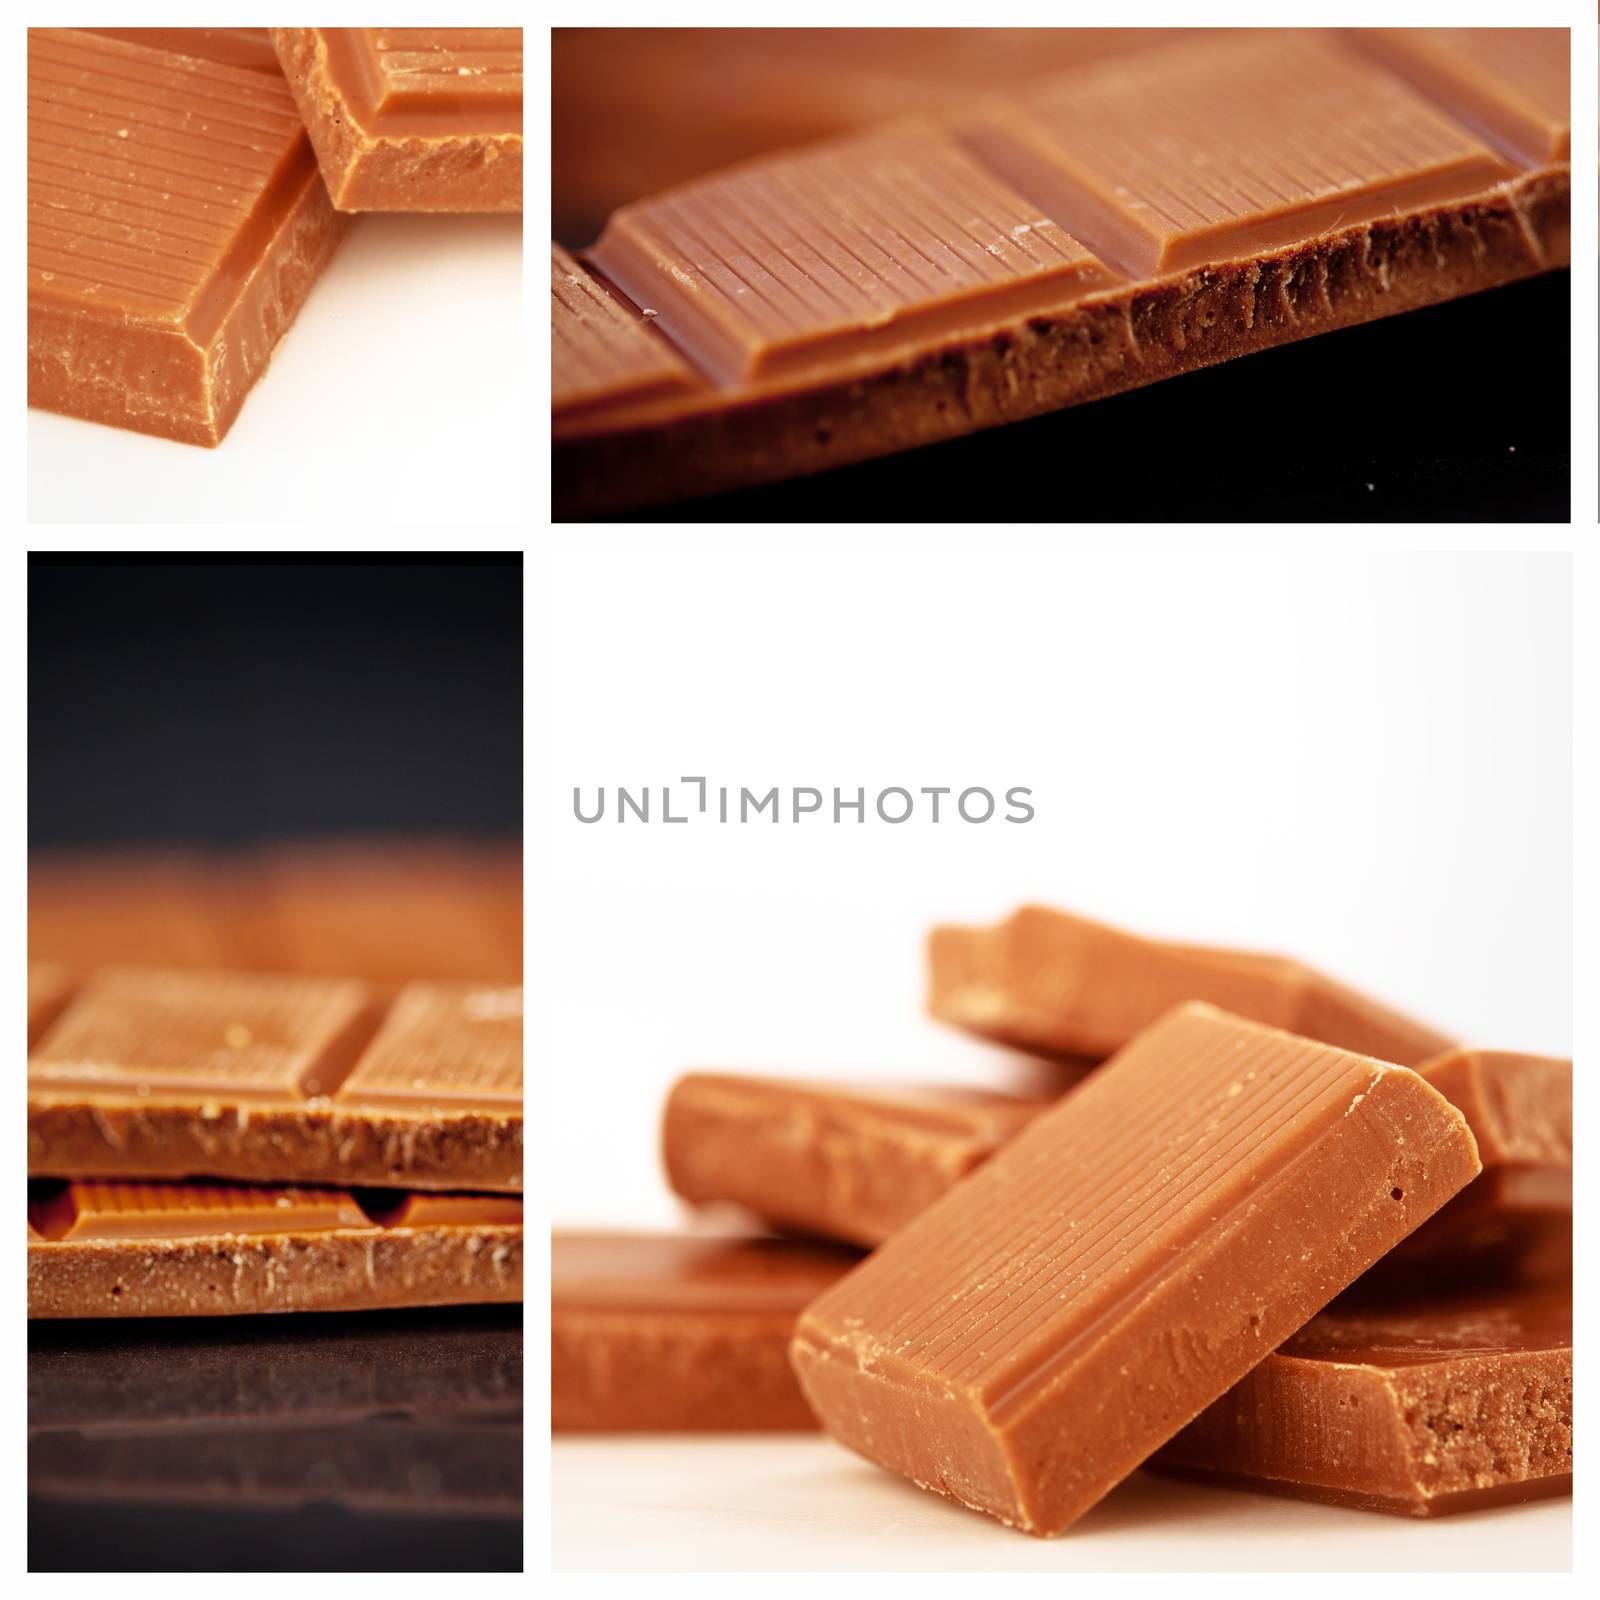 Composite image of two pieces of milk chocolate by Wavebreakmedia